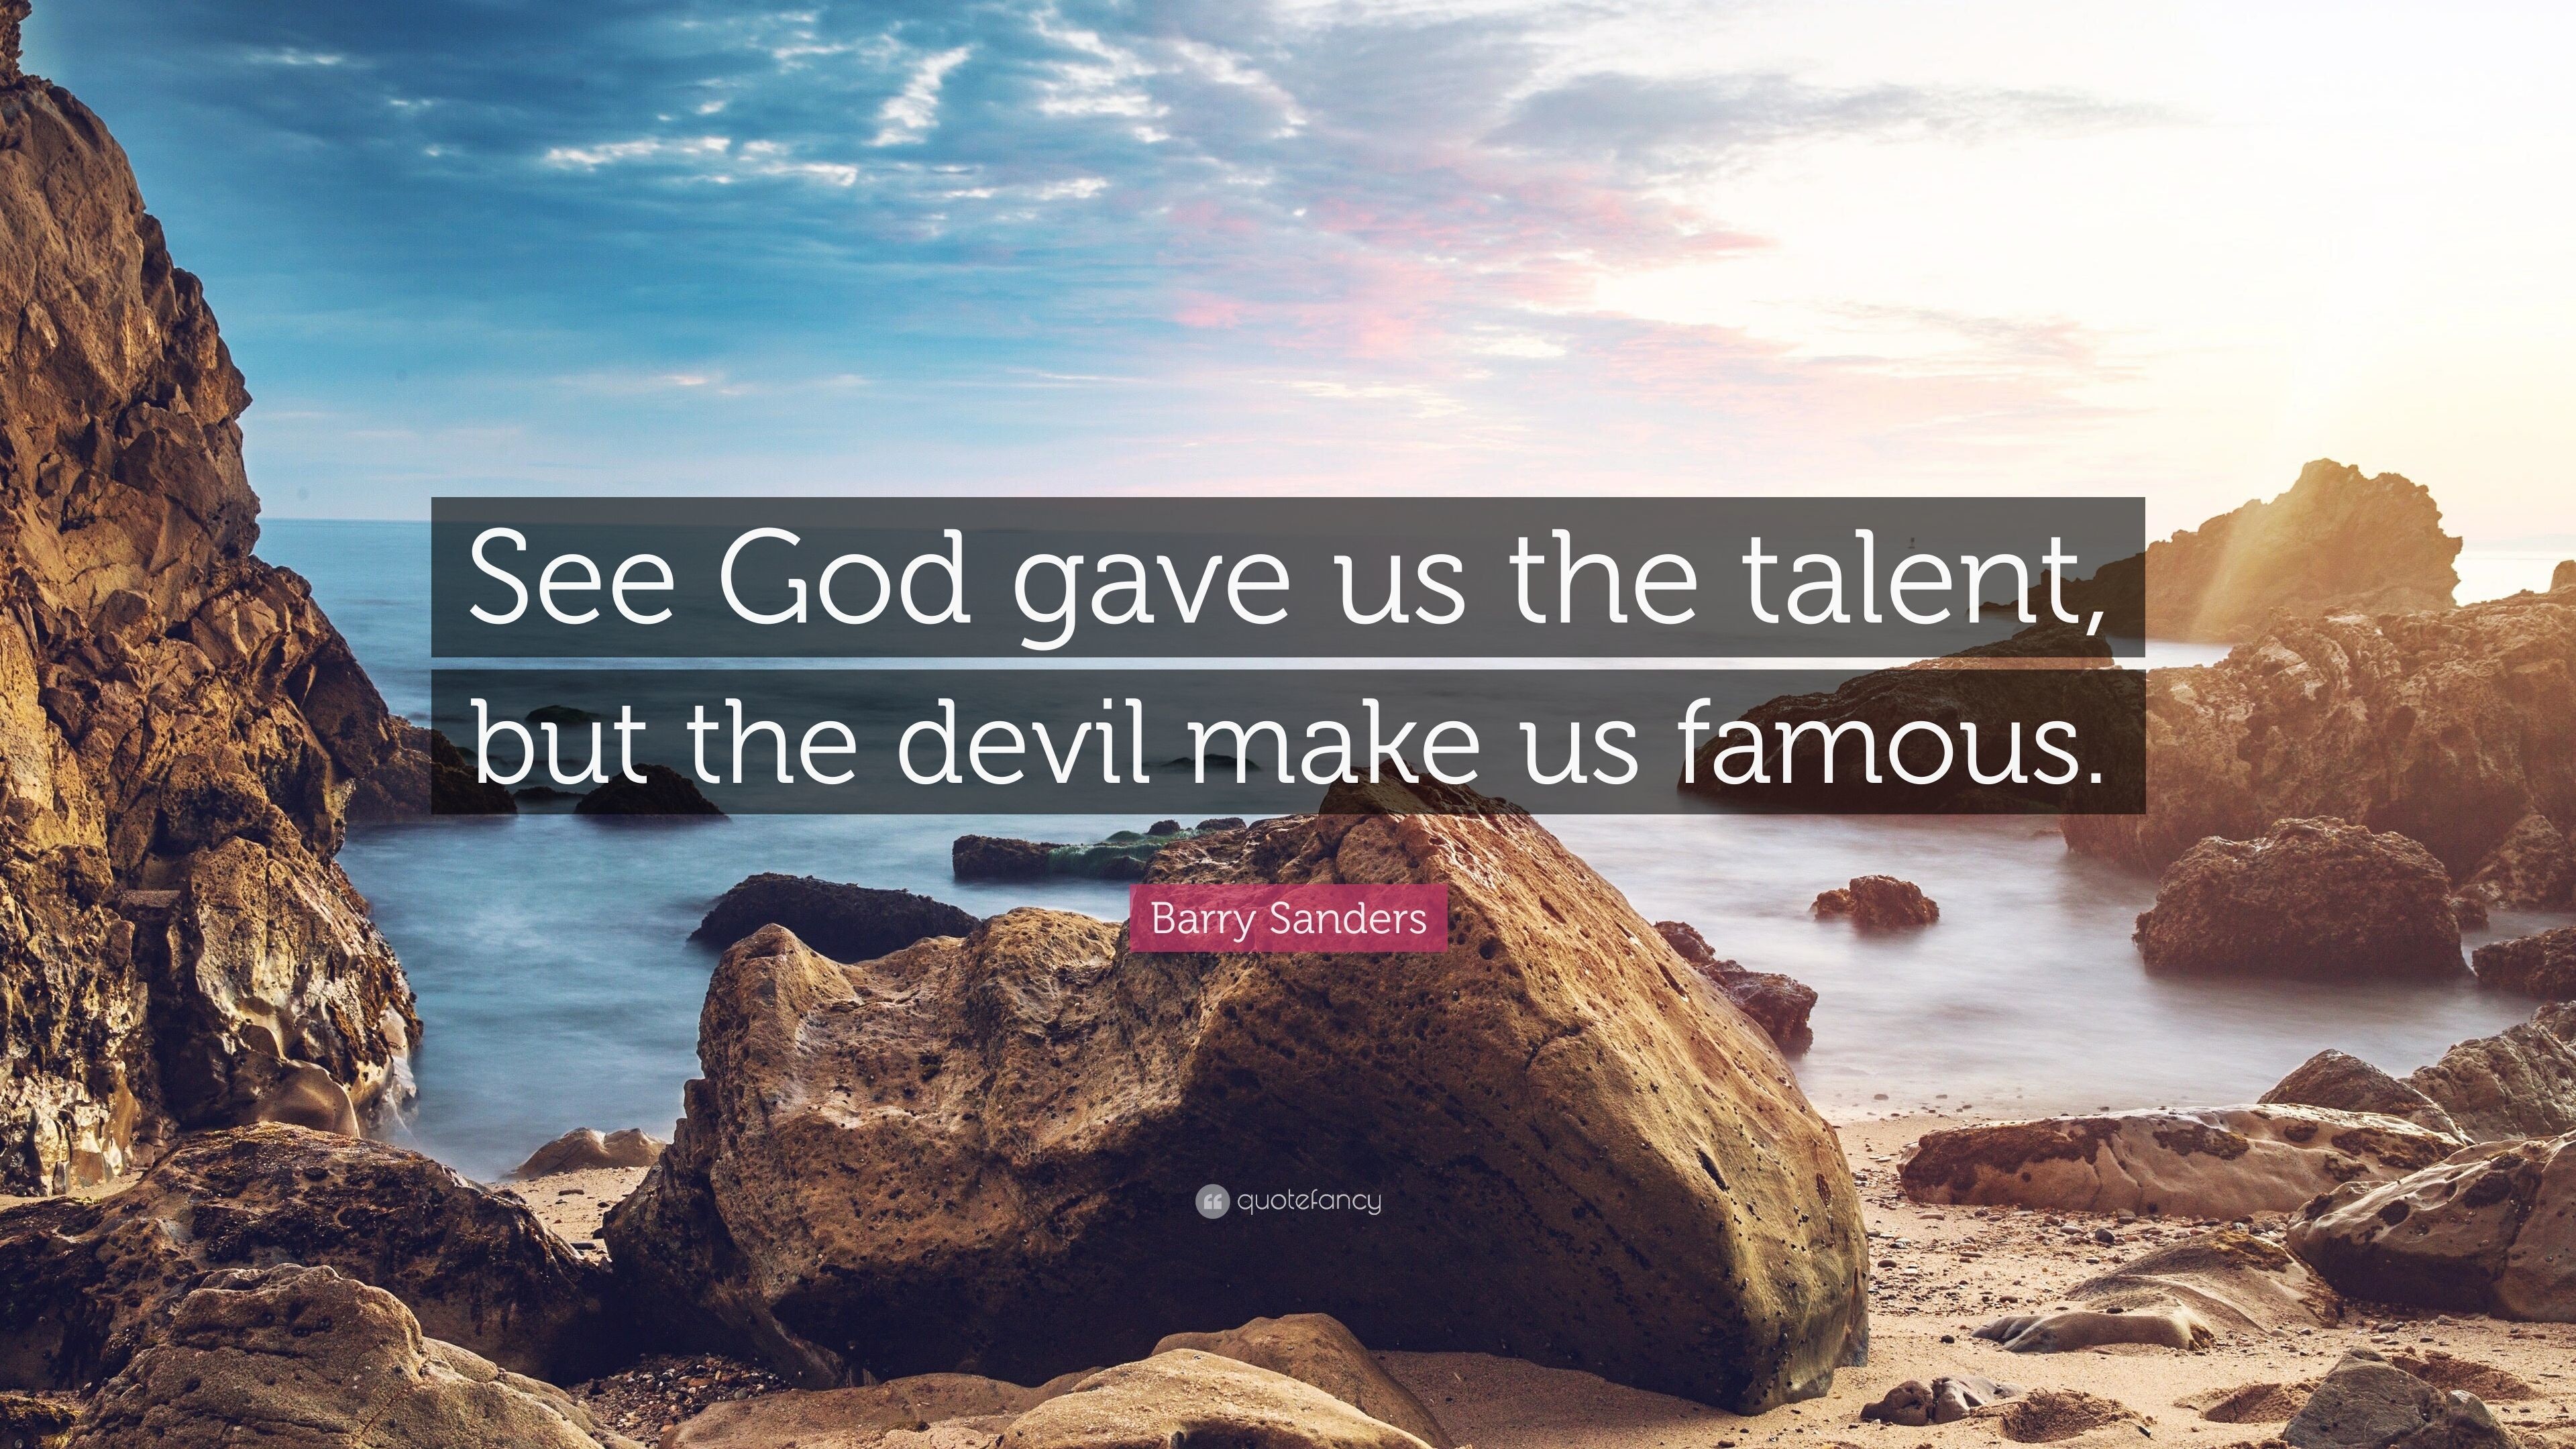 3840x2160 Barry Sanders Quote: “See God gave us the talent, but the devil make